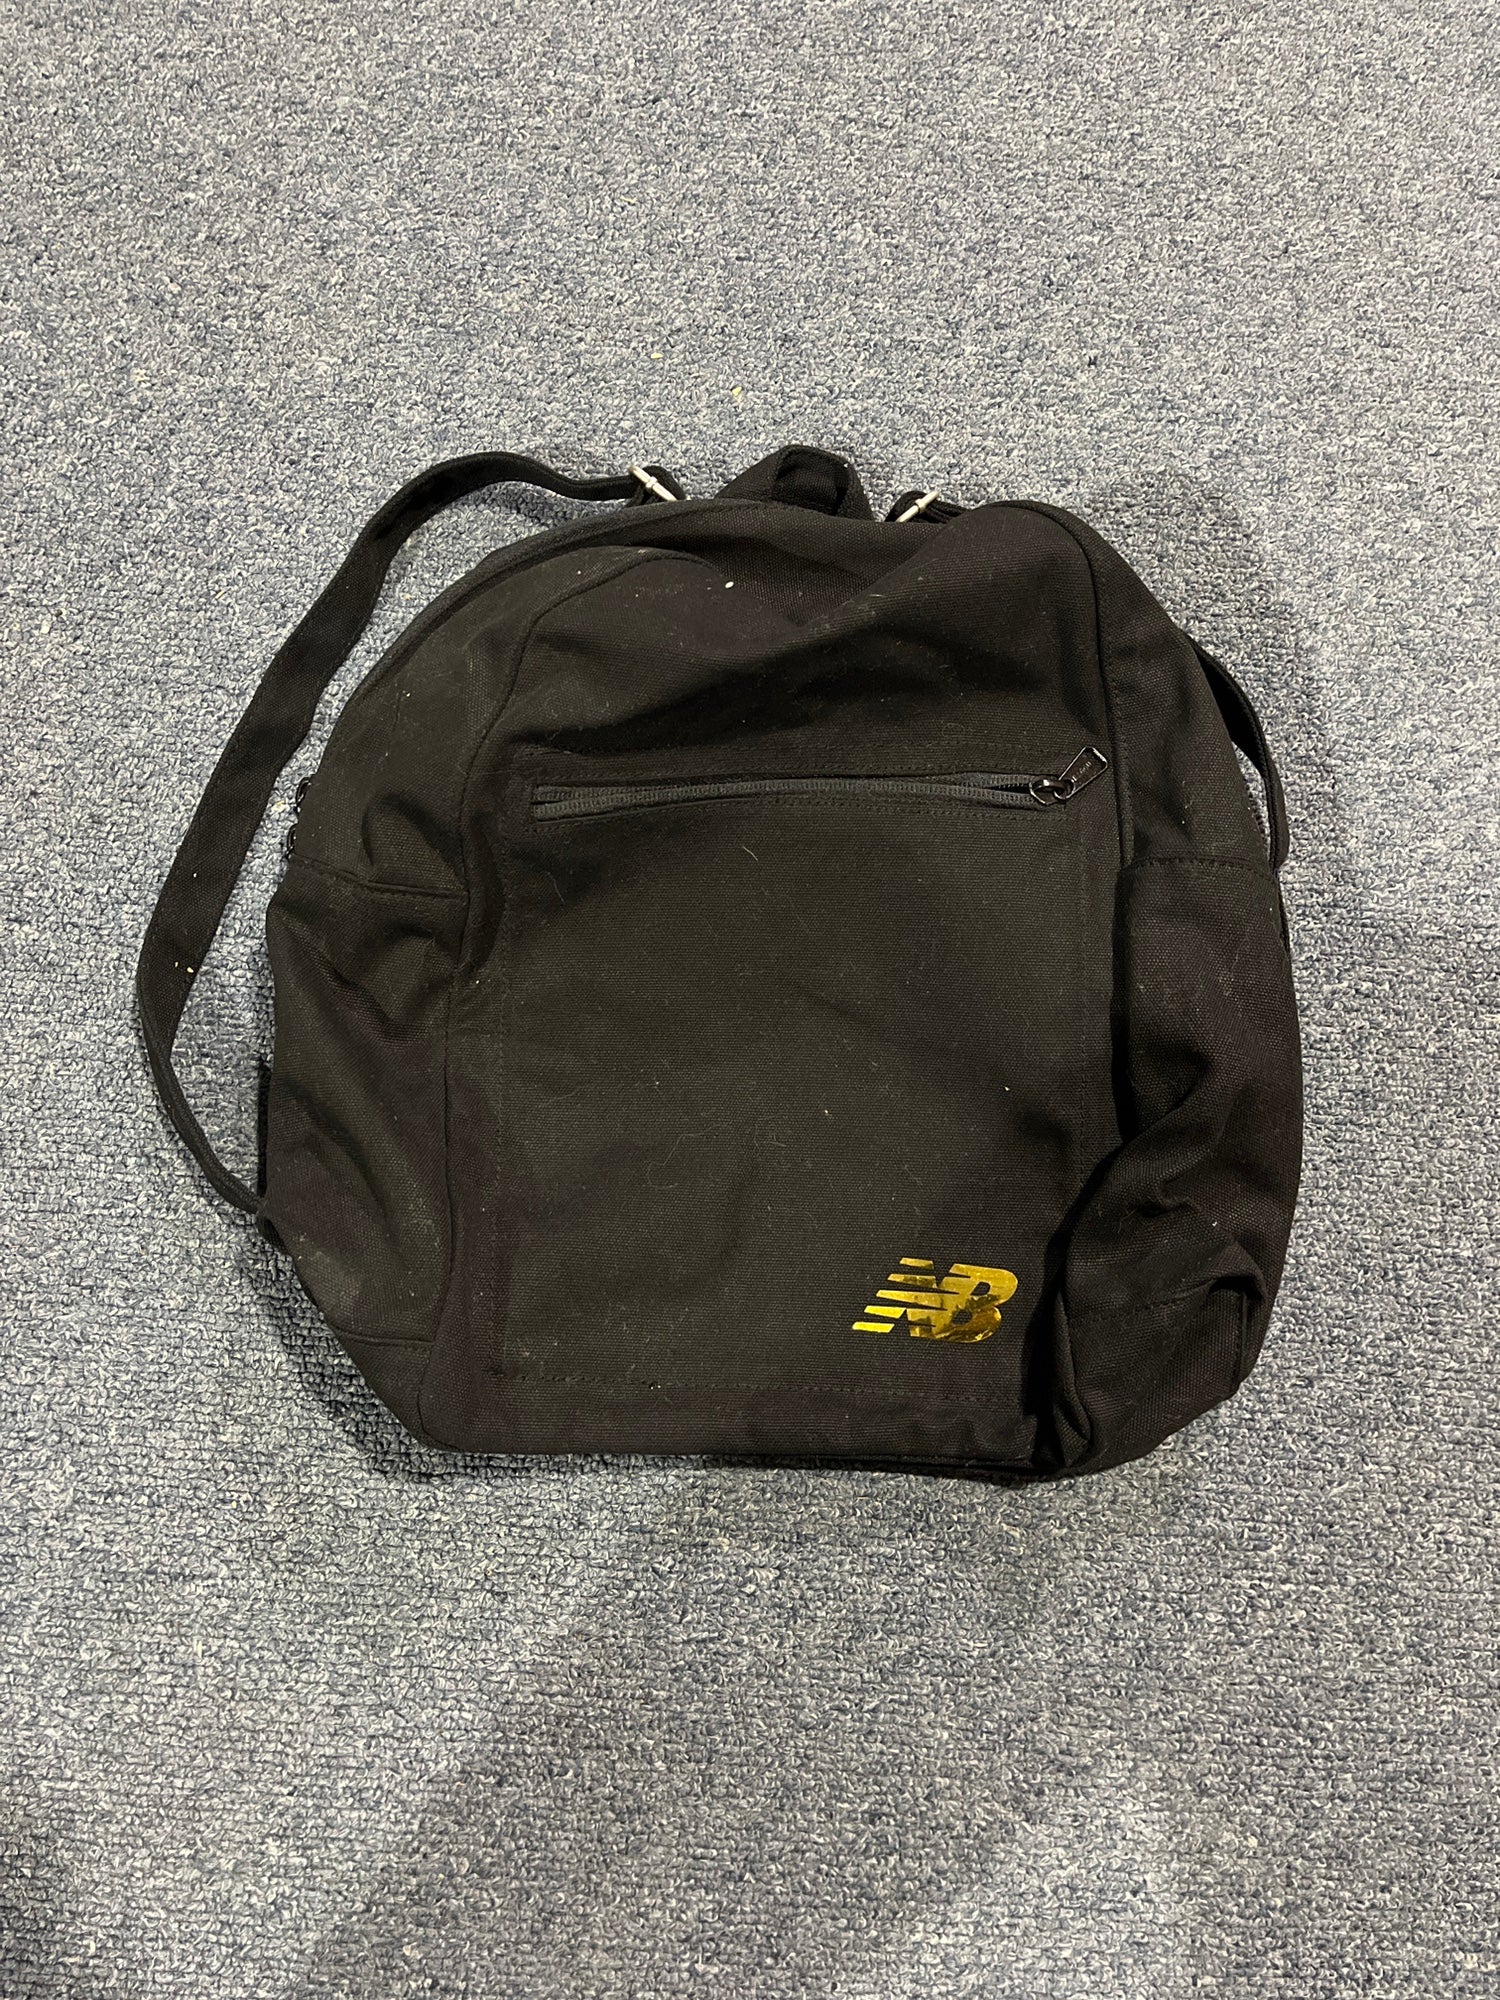 Pacific Rink Coaches Bag / “The Pond Pack” Brand New